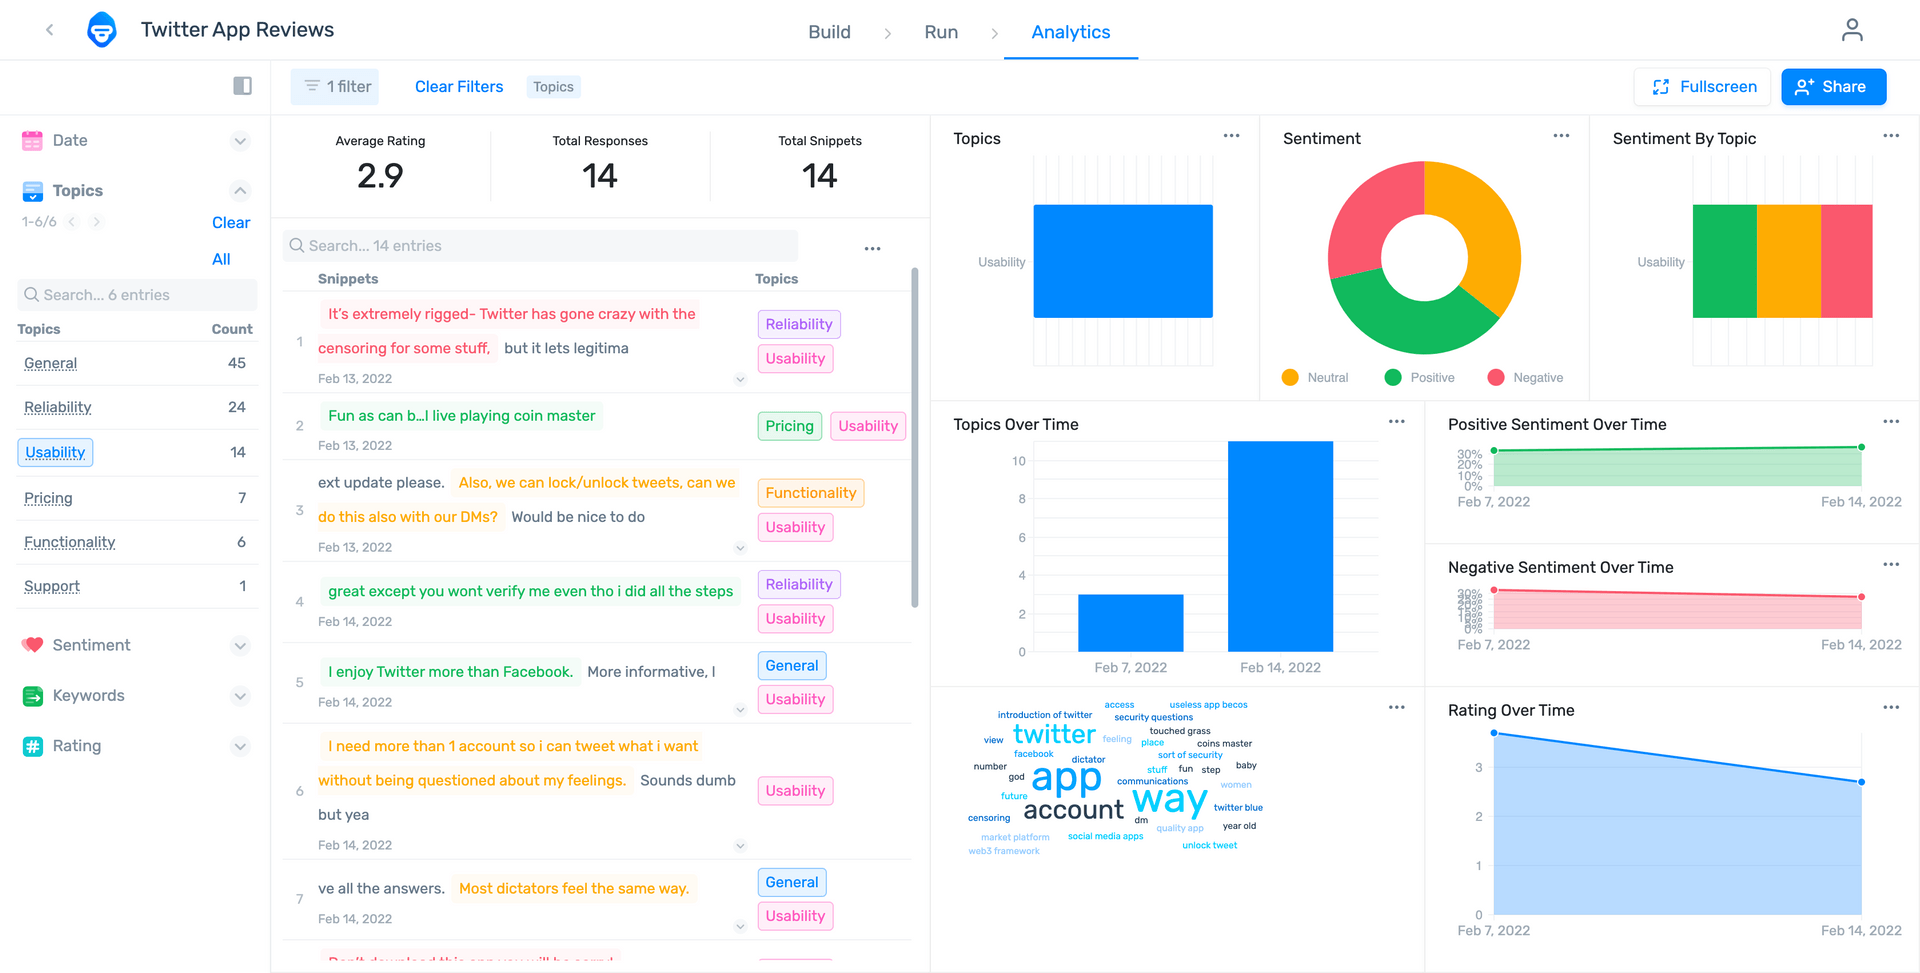 MonkeyLearn studio dashboard tailored to Twitter App Reviews filtered by usability.